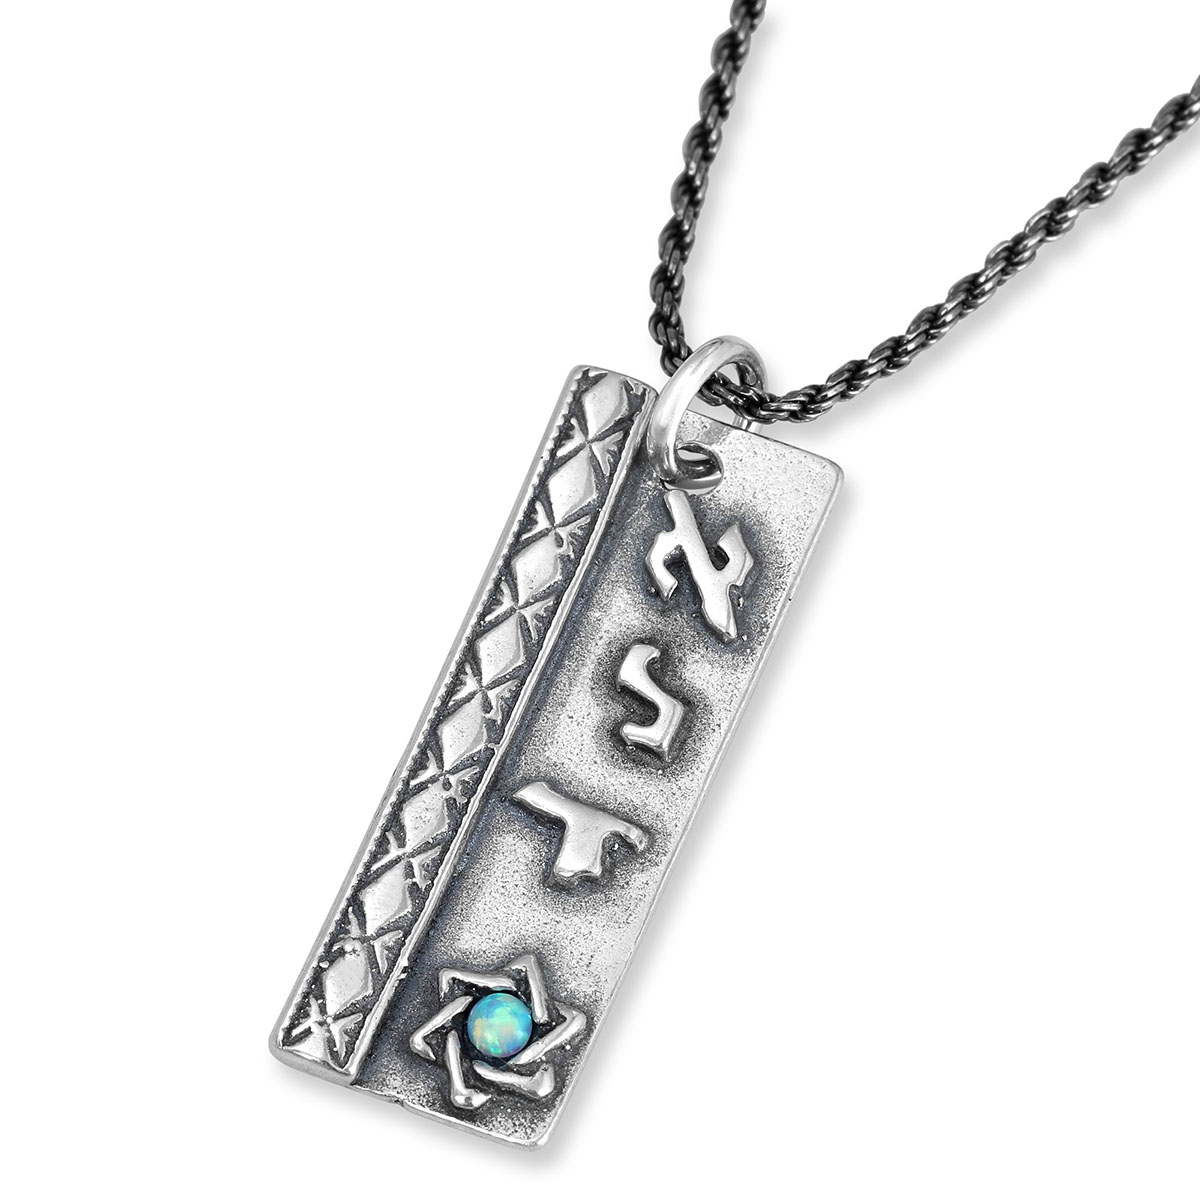 Handmade 925 Sterling Silver Kabbalah Pendant With Opal Stone – Divine Protection - 1